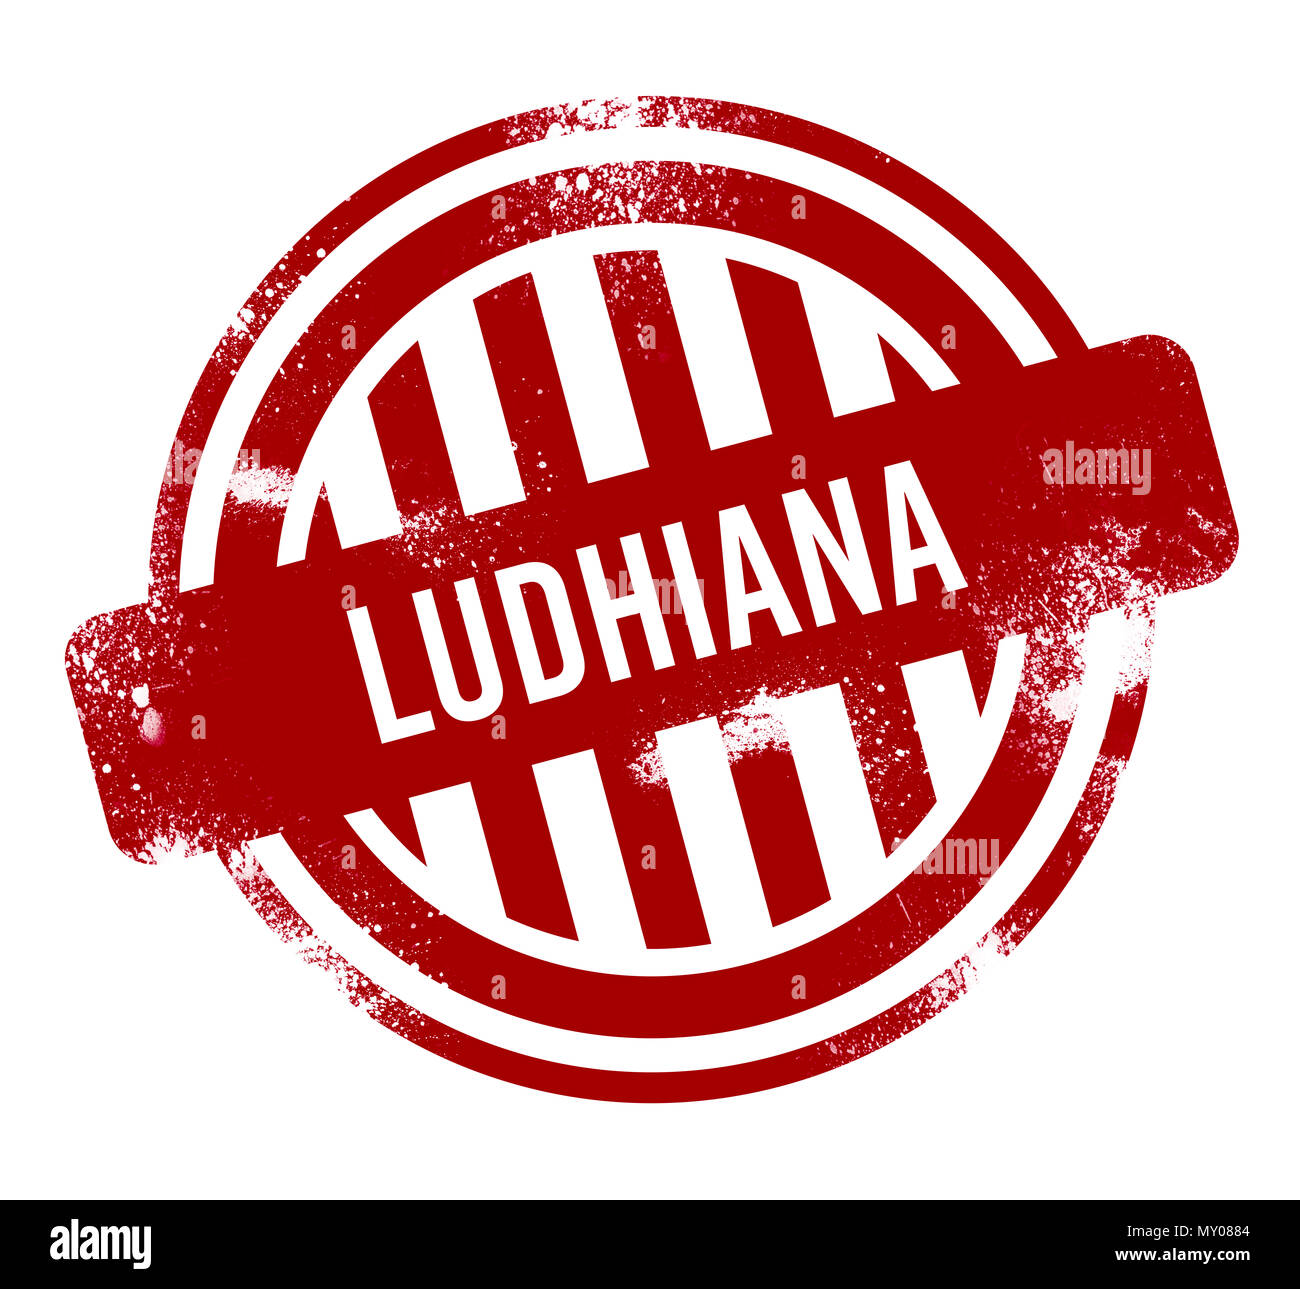 Ludhiana - Red grunge button, stamp Stock Photo